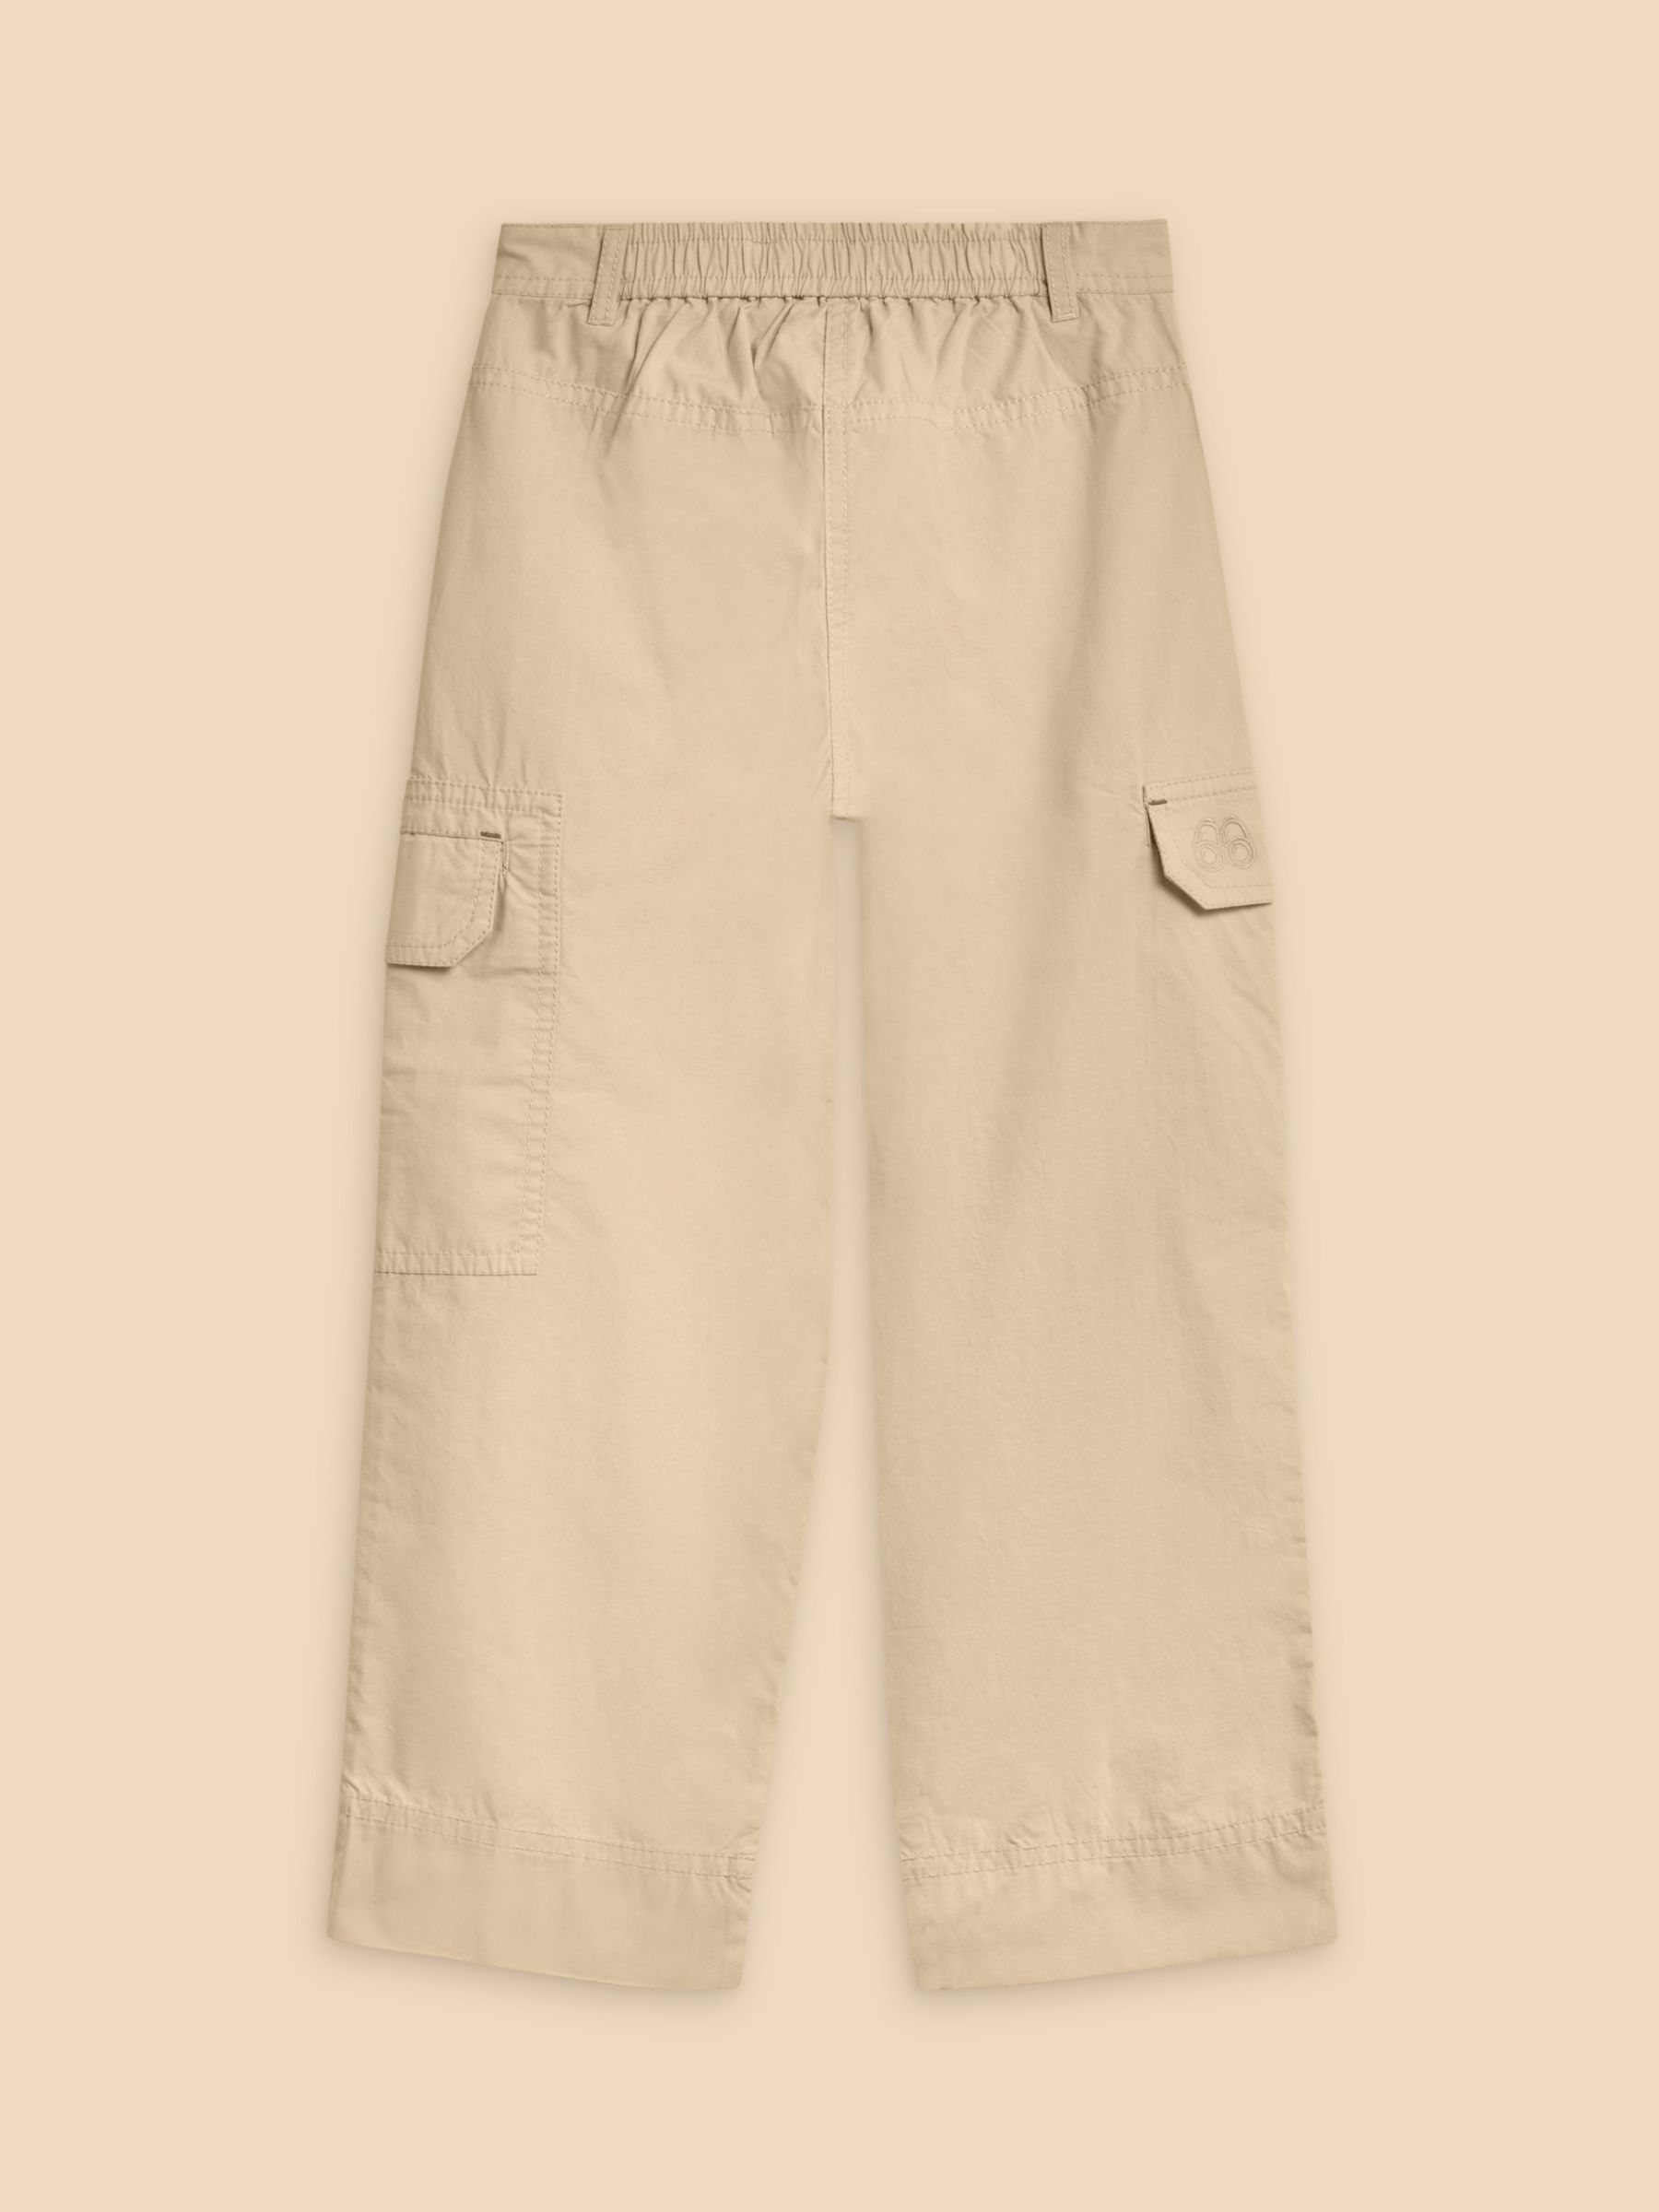 Buy White Stuff Kids' Colette Trousers, Beige Online at johnlewis.com